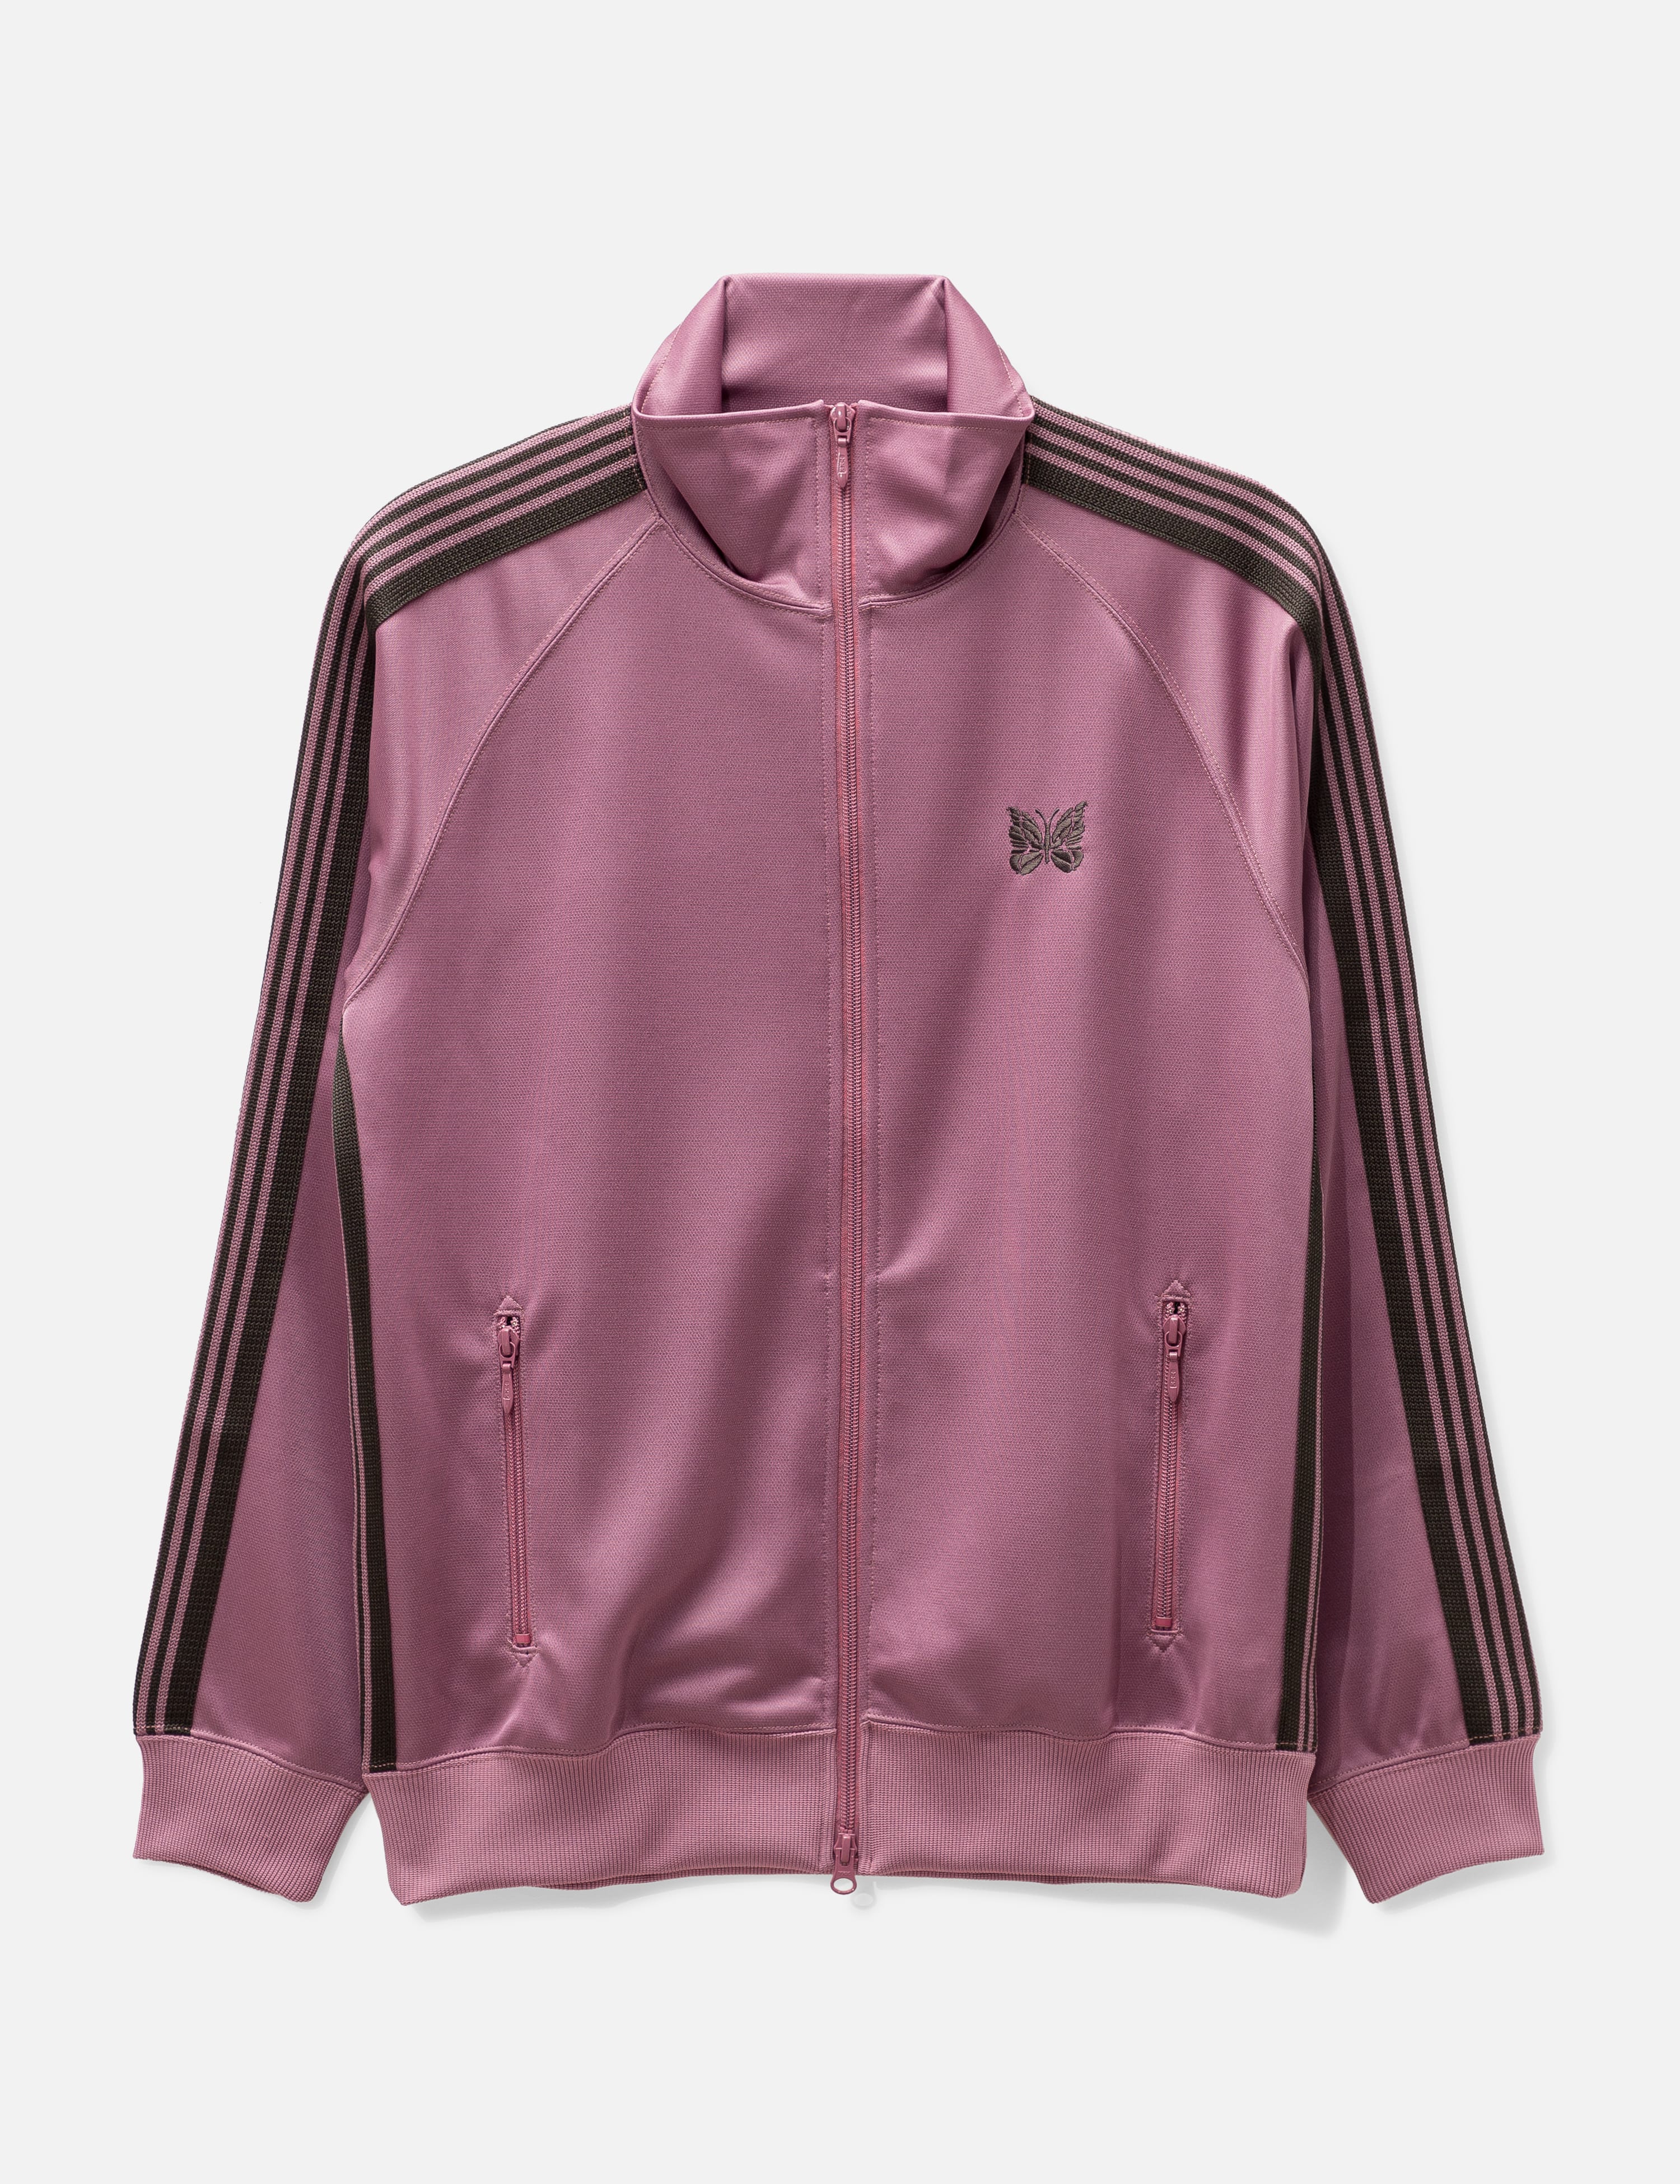 Needles   Track Jacket   HBX   Globally Curated Fashion and